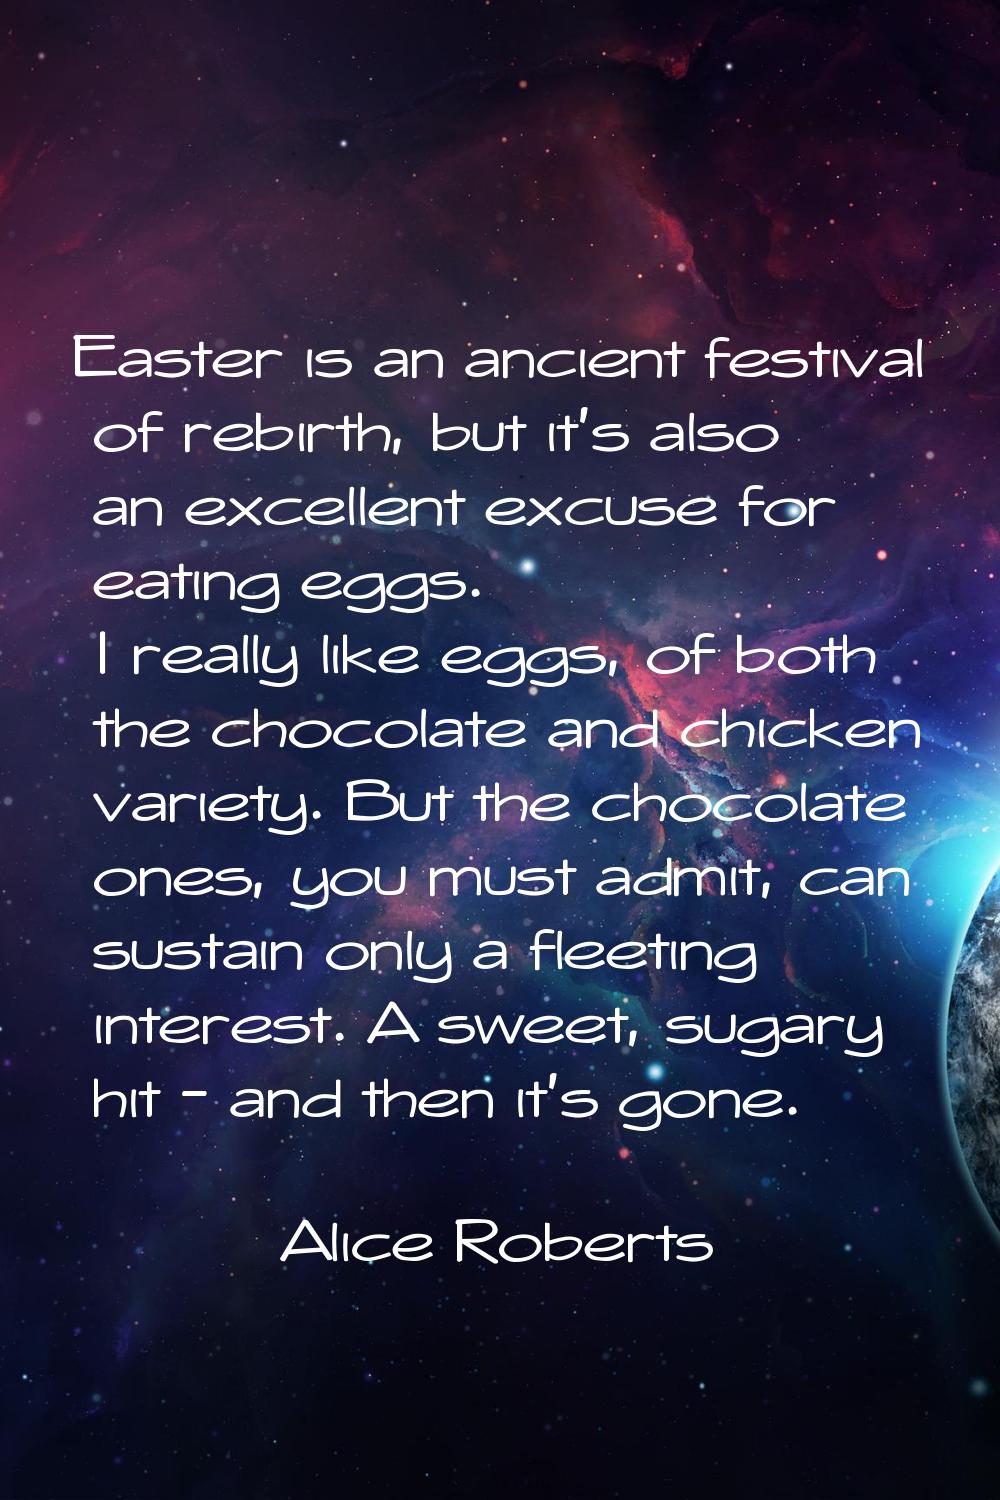 Easter is an ancient festival of rebirth, but it’s also an excellent excuse for eating eggs. I real